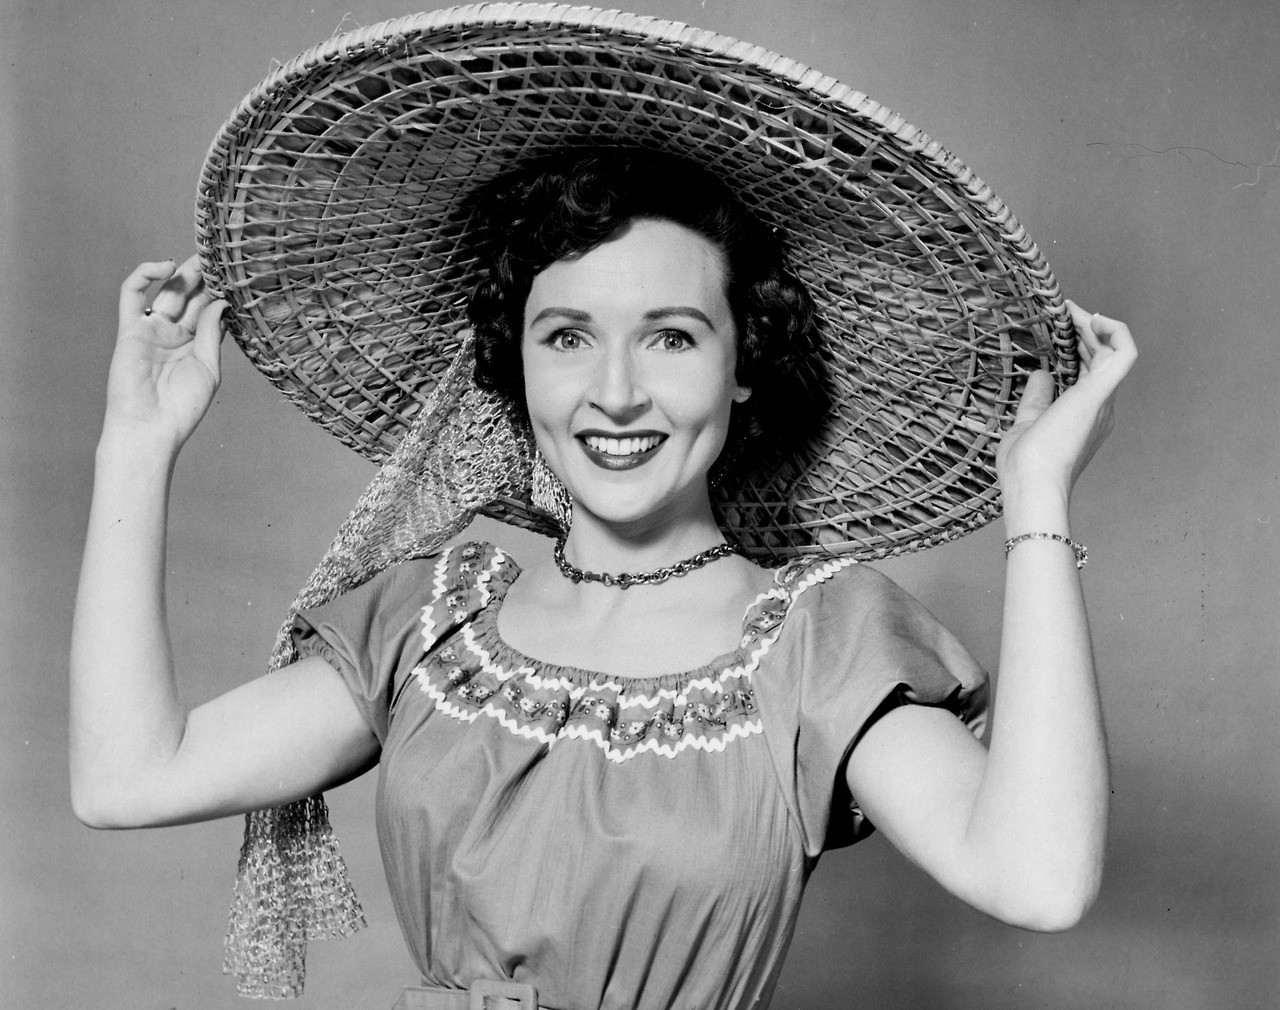 The Hilarious Betty White Looking Adorable In The 1950s NSF